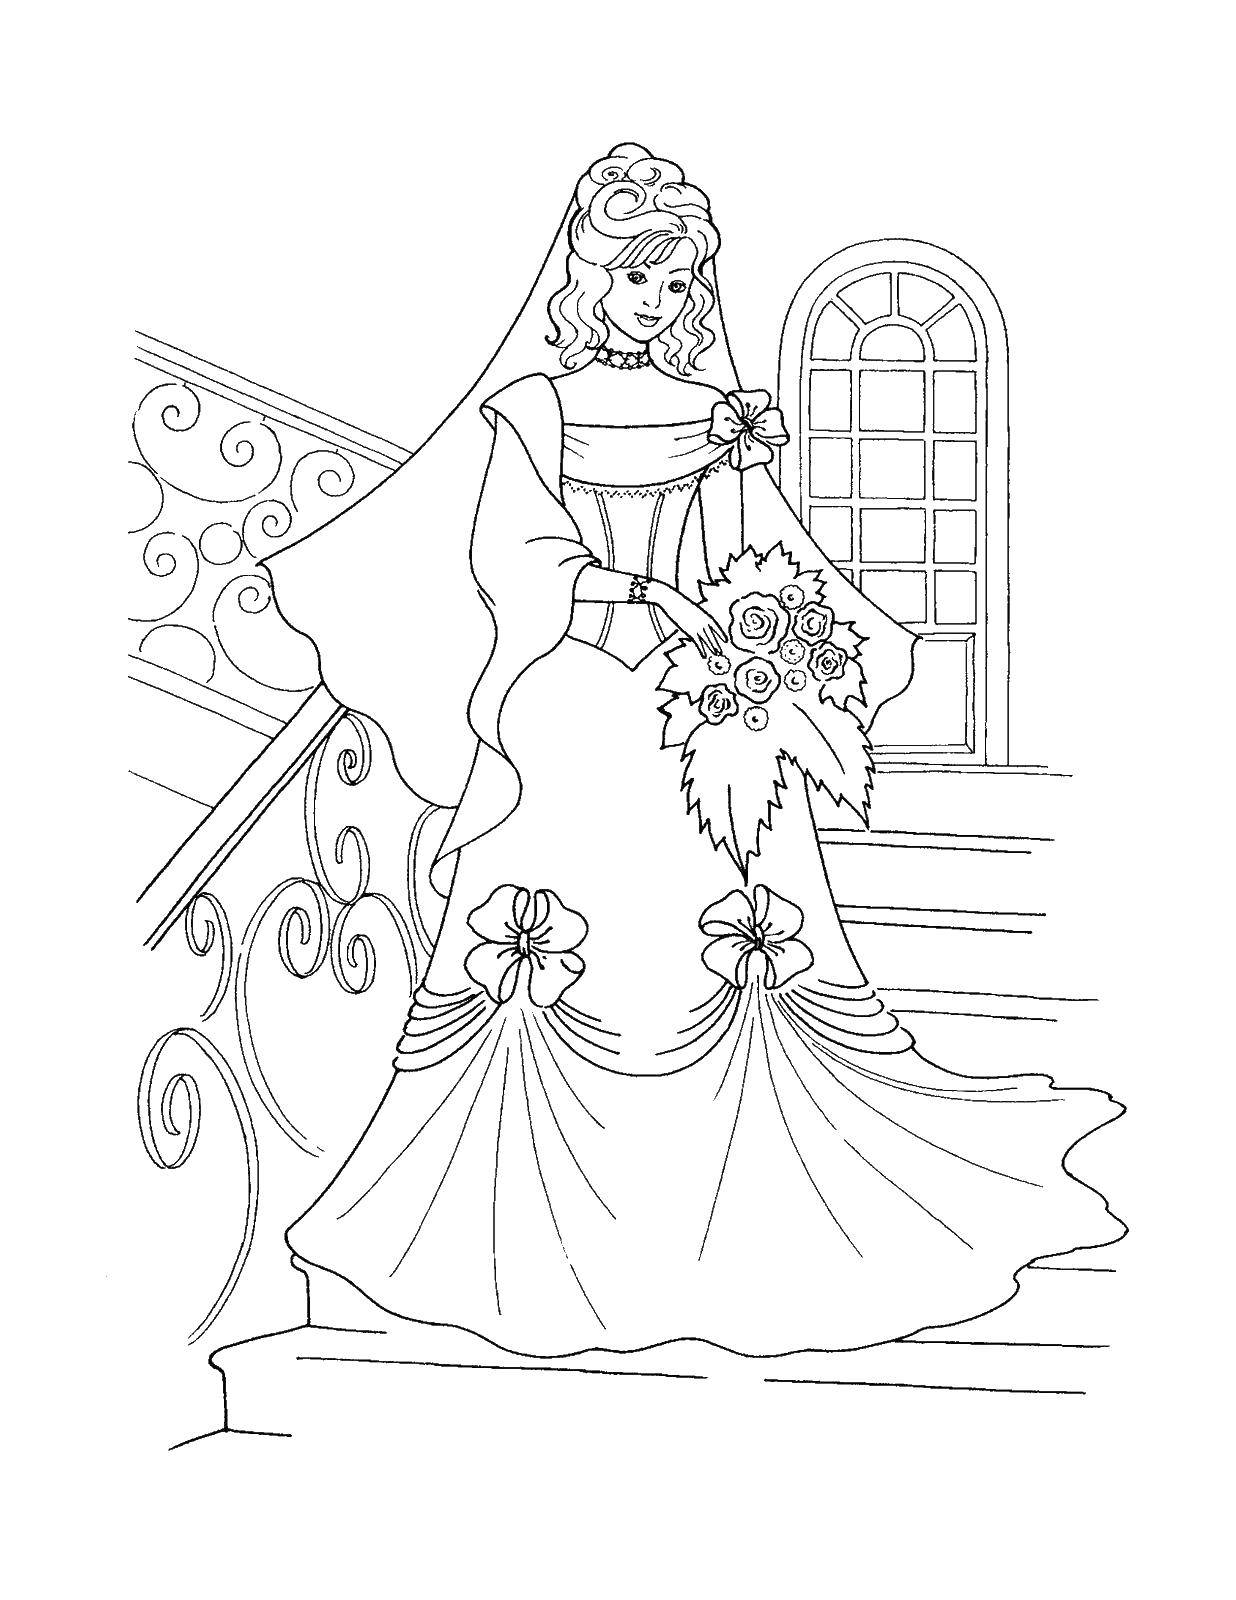 Coloring Princess on the stairs. Category Locks . Tags:  Princess, stairs, flowers.